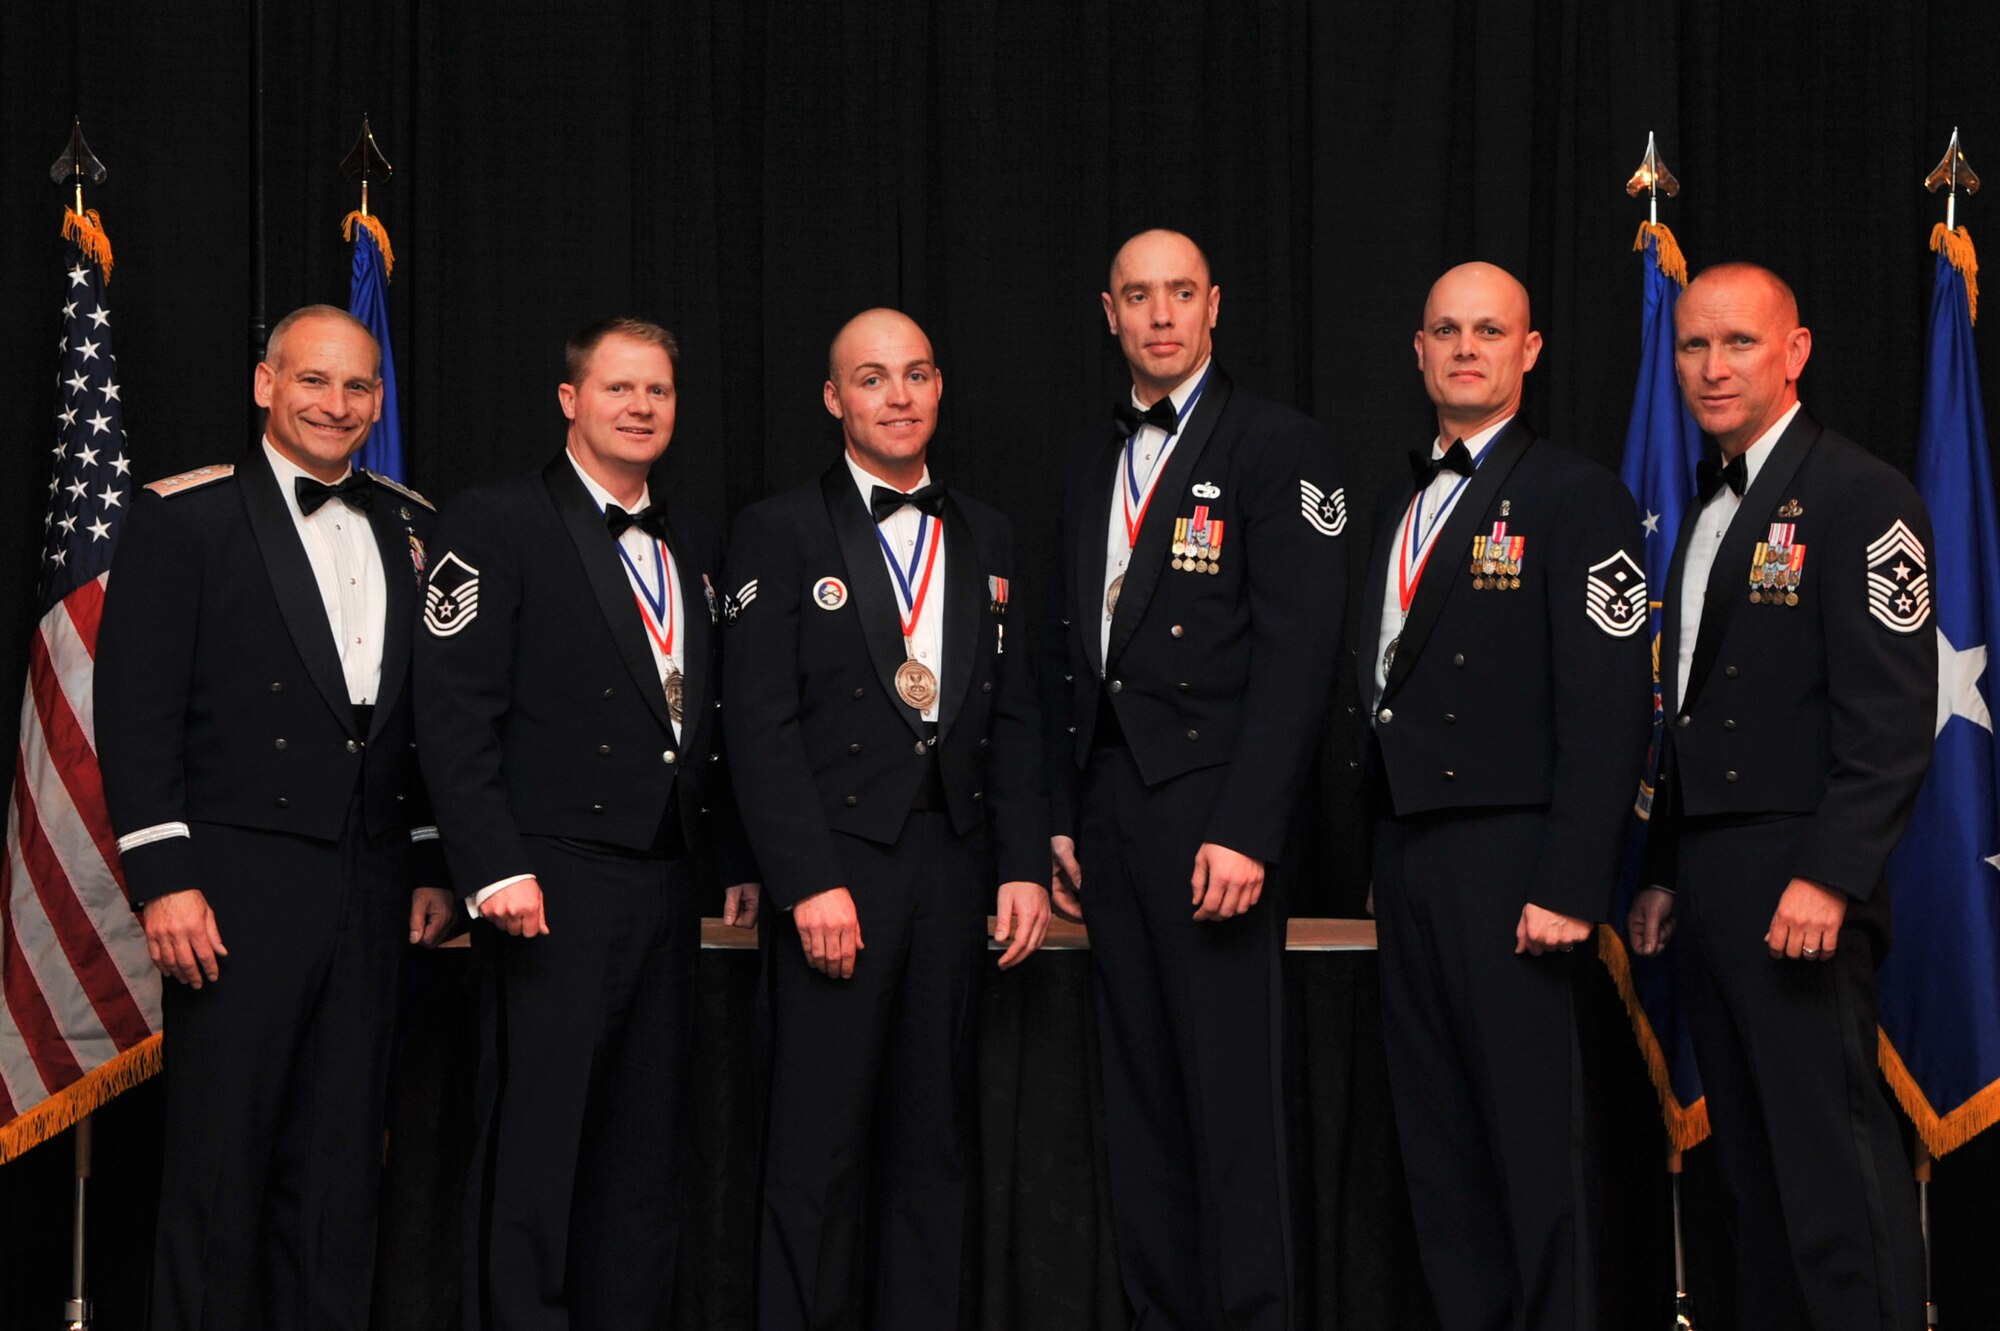 Lt. Gen. James Kowalski, Air Force Global Strike Command commander, and
Chief Master Sgt. Brian Hornback, AFGSC command chief (far right),
recognized winners of the Air Force Global Strike Command Outstanding Airmen
of the Year during a banquet March 24 in Shreveport, La. From L to R: Master
Sgt. Tyler Terrel, Outstanding Senior Non-Commissioned Officer of the Year;
Senior Airman Toby Harter, Outstanding Airman of the Year; Tech. Sgt.
Bradley Williams, Outstanding Non-Commissioned Officer of the Year; and
Master Sgt. Stephen Hart, Outstanding First Sergeant of the Year.  (U.S. Air
Force photo/Airman 1st Class Micaiah Anthony)